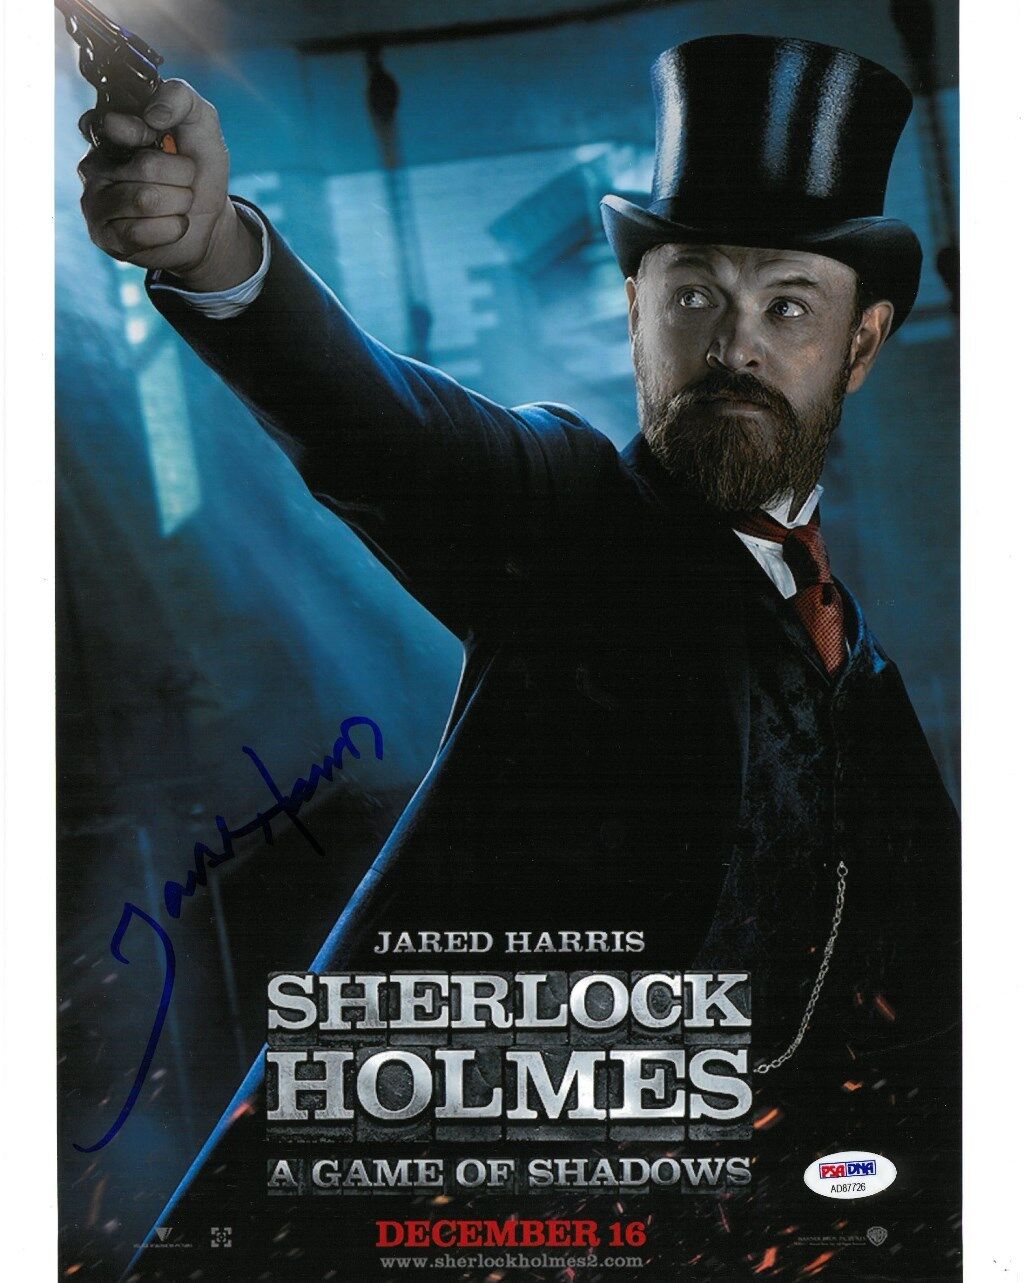 Jared Harris Signed Sherlock Holmes Autographed 11x14 Photo Poster painting PSA/DNA #AD87726